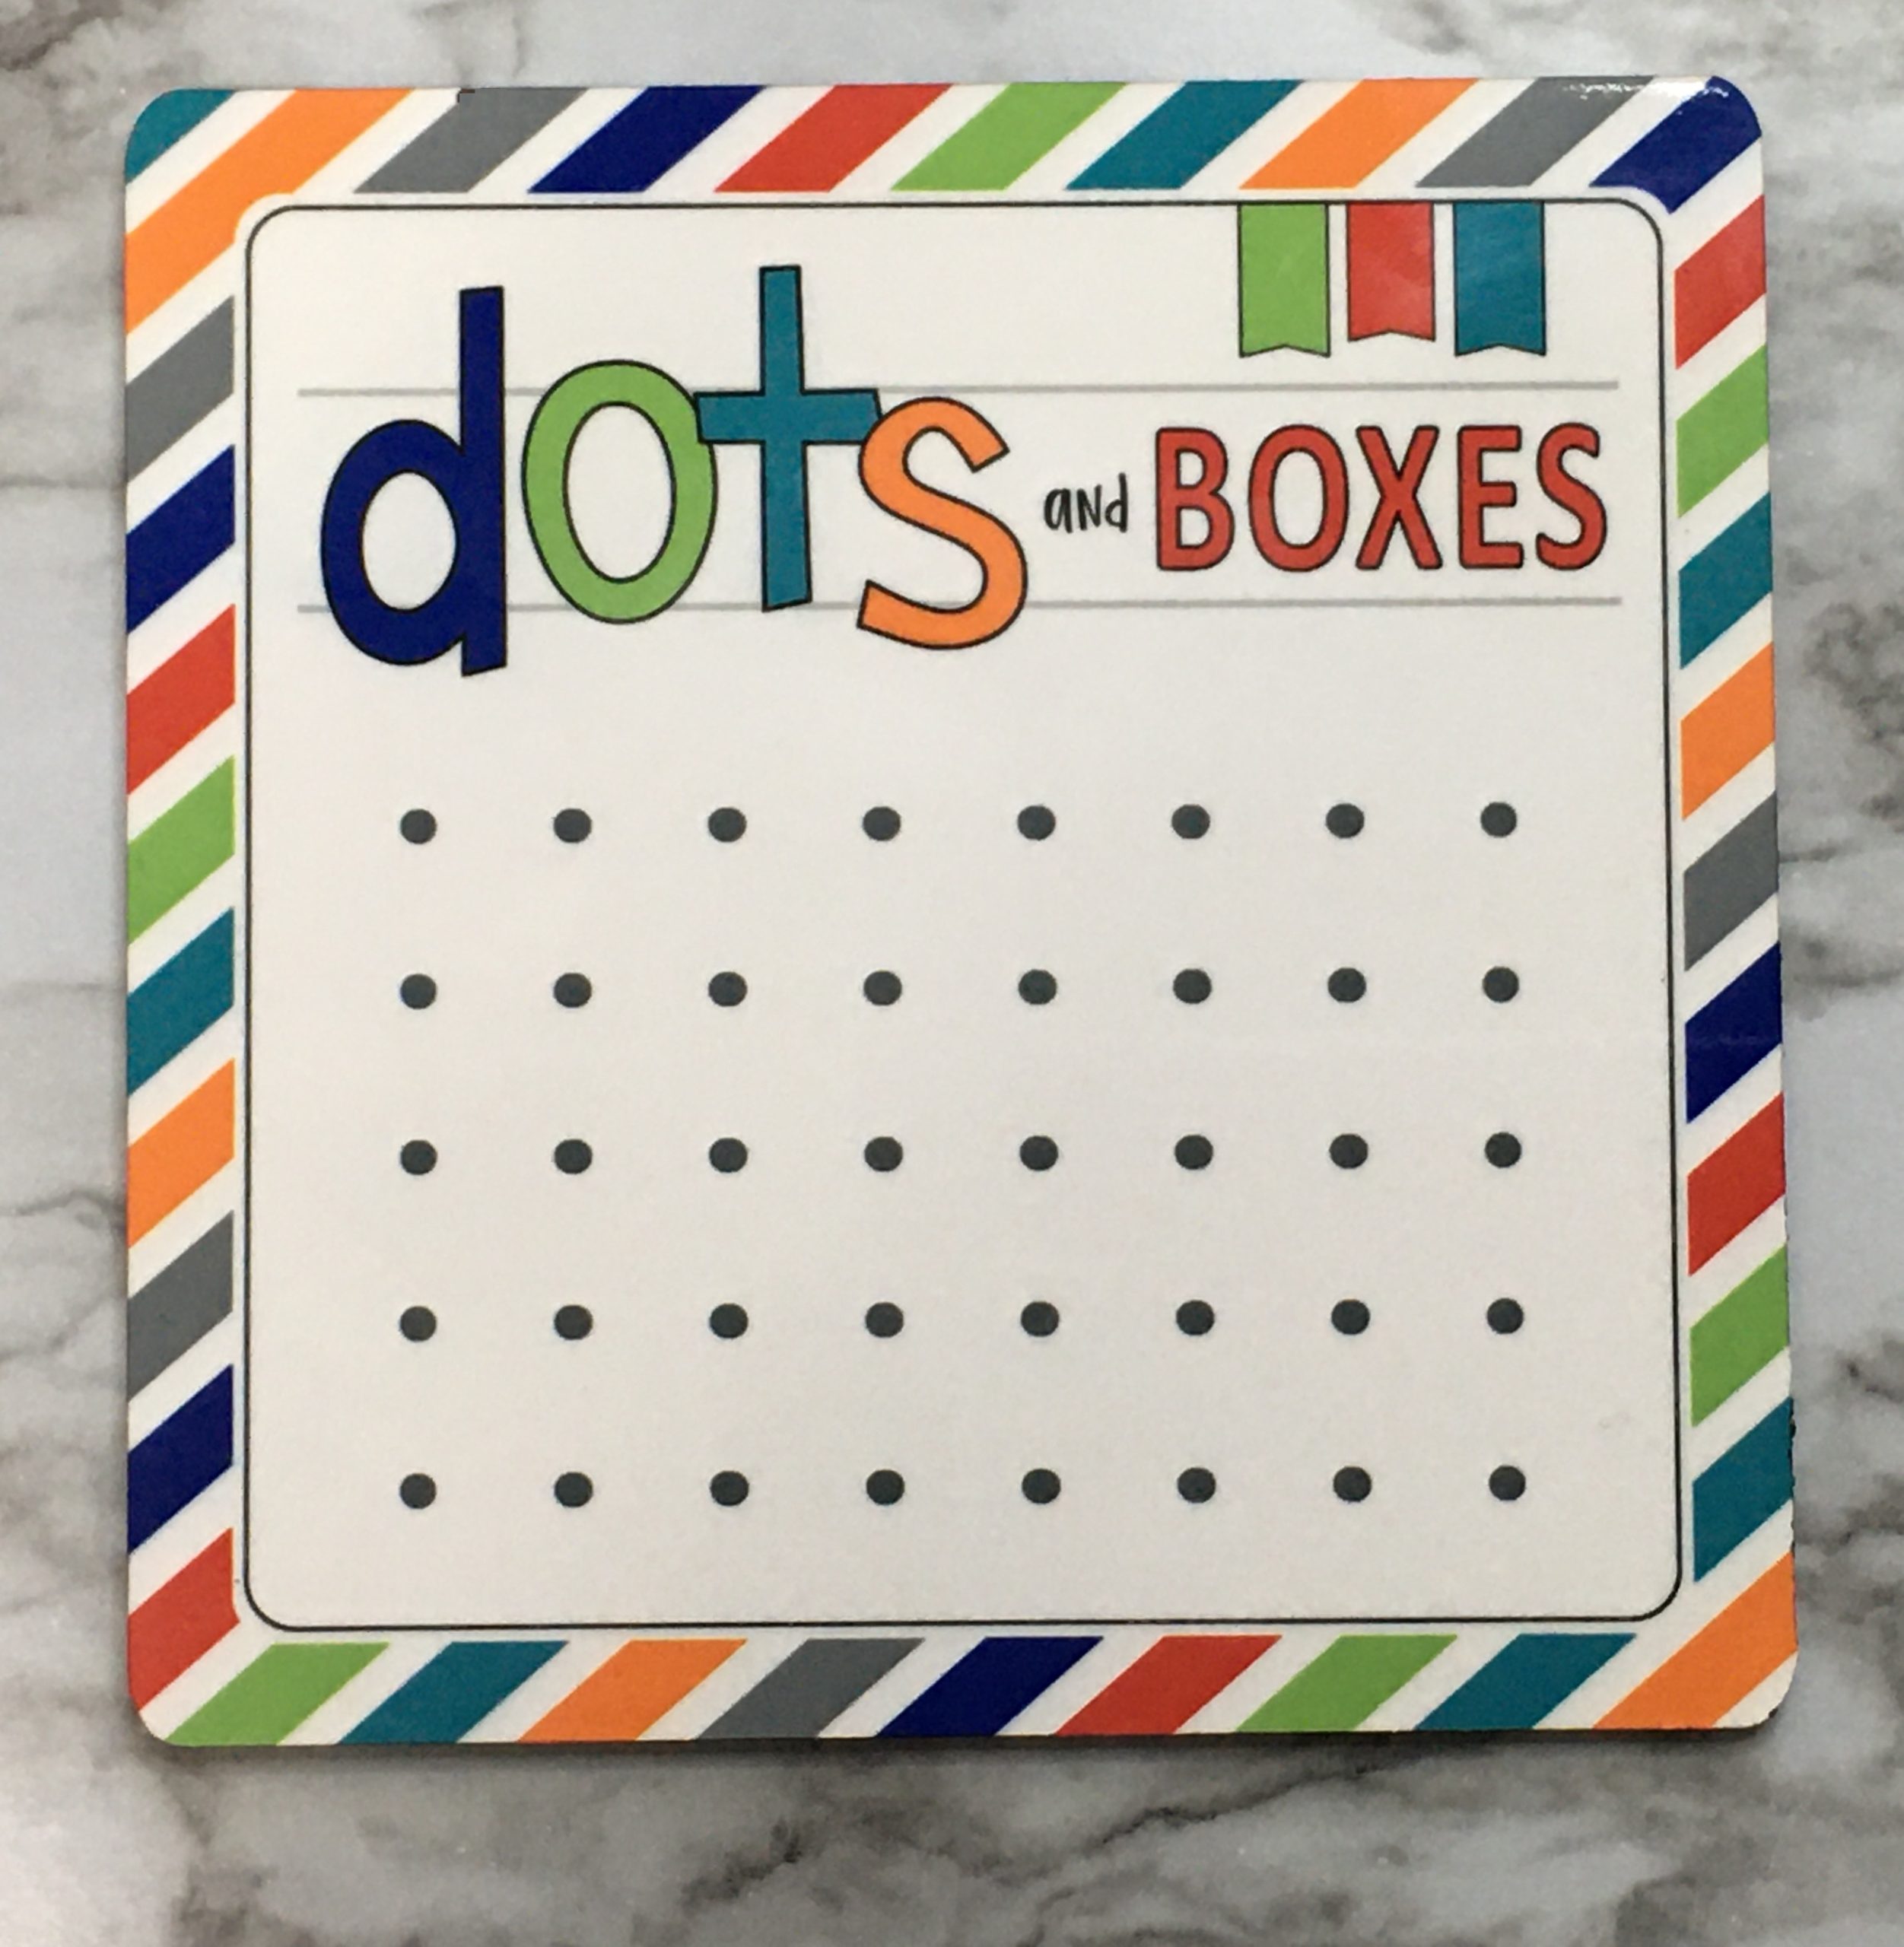 Dots & Boxes Dry Erase Board